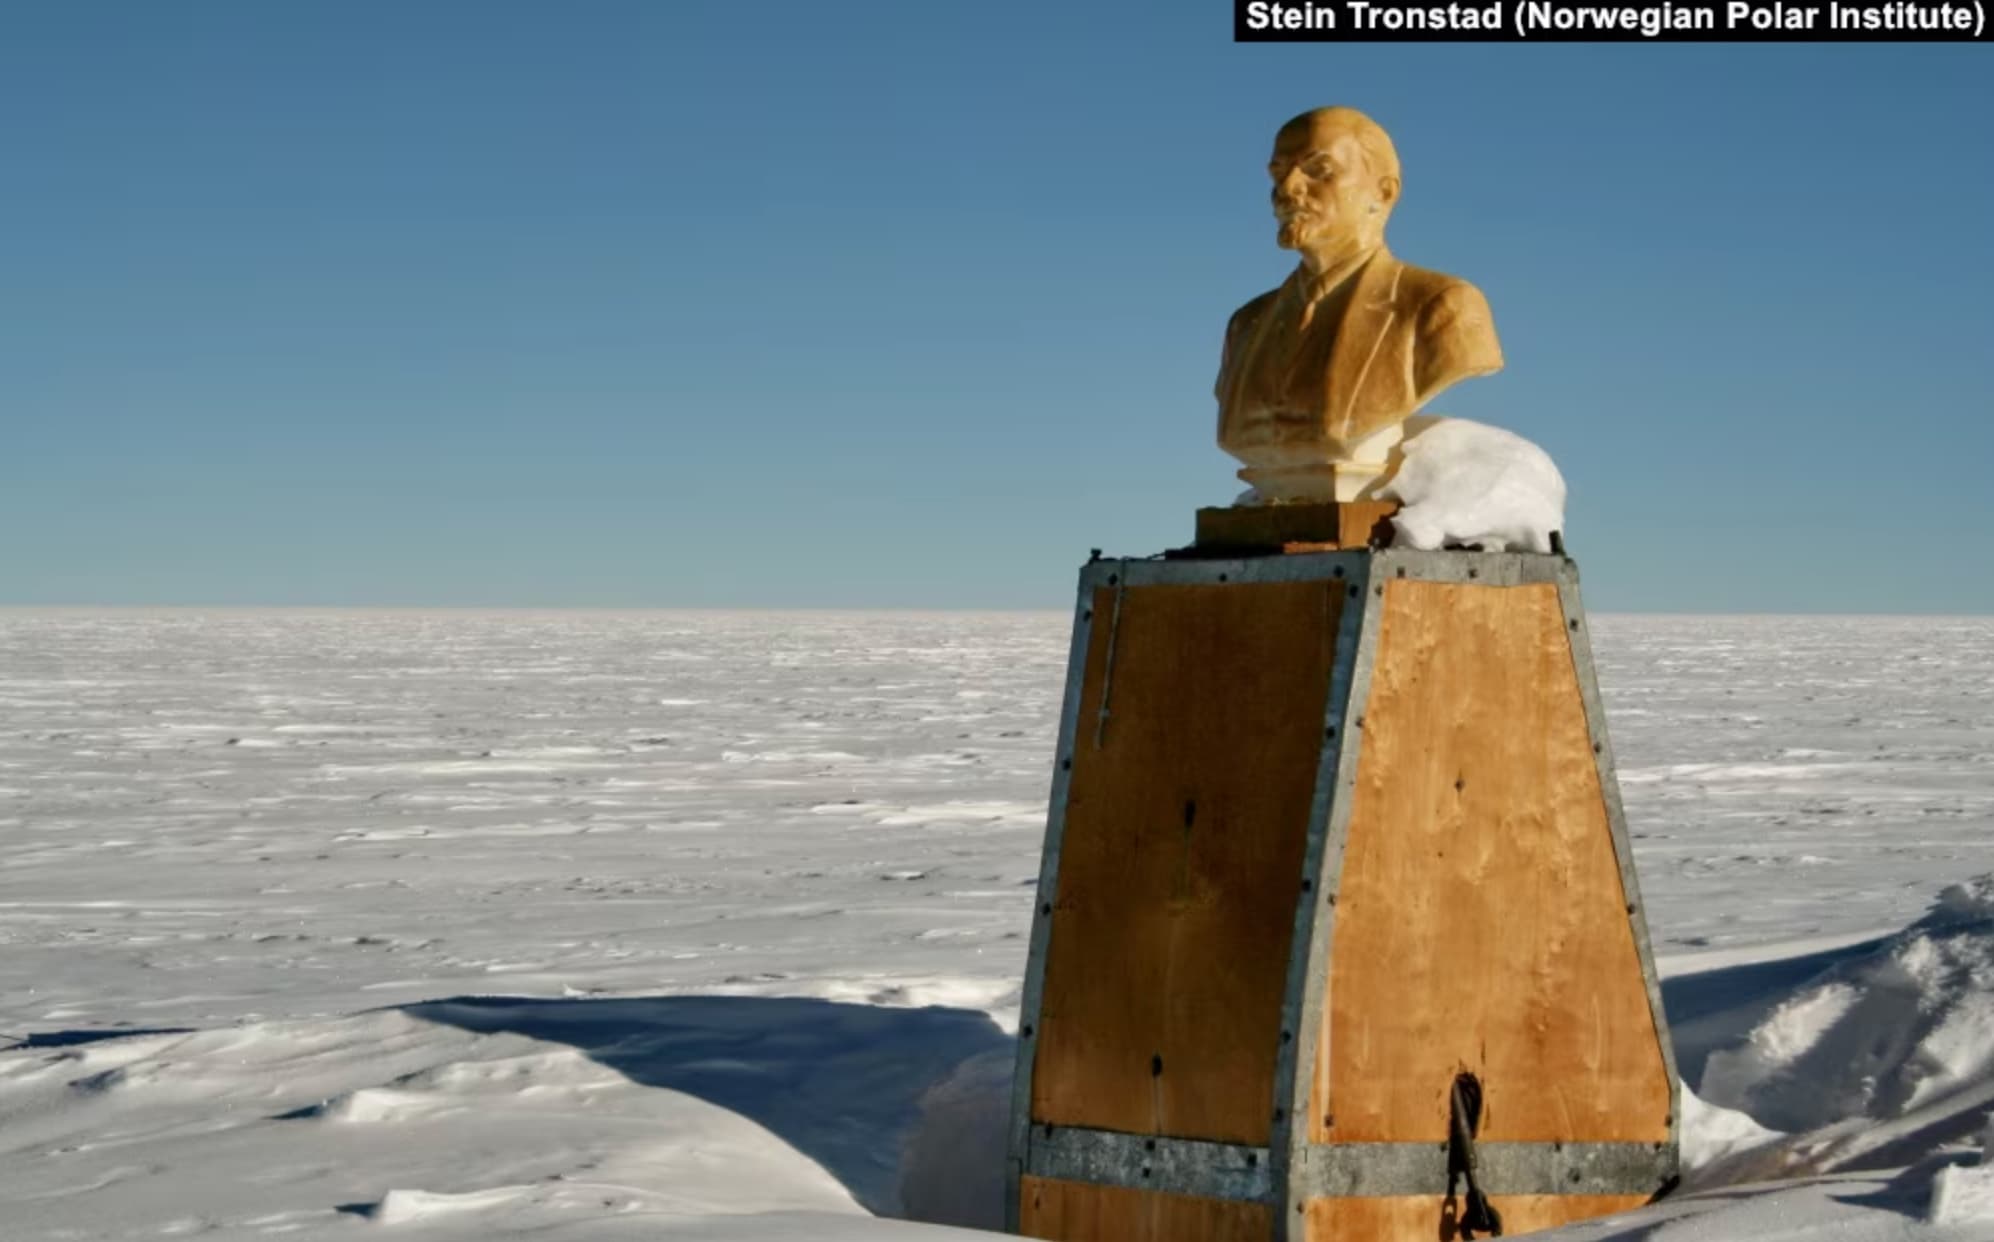 “There is an old Soviet scientific research hut buried 20 ft. under snow in one of the most inaccessible places in Antarctica. If you can make it in the hut there is a visitors book you can sign.”